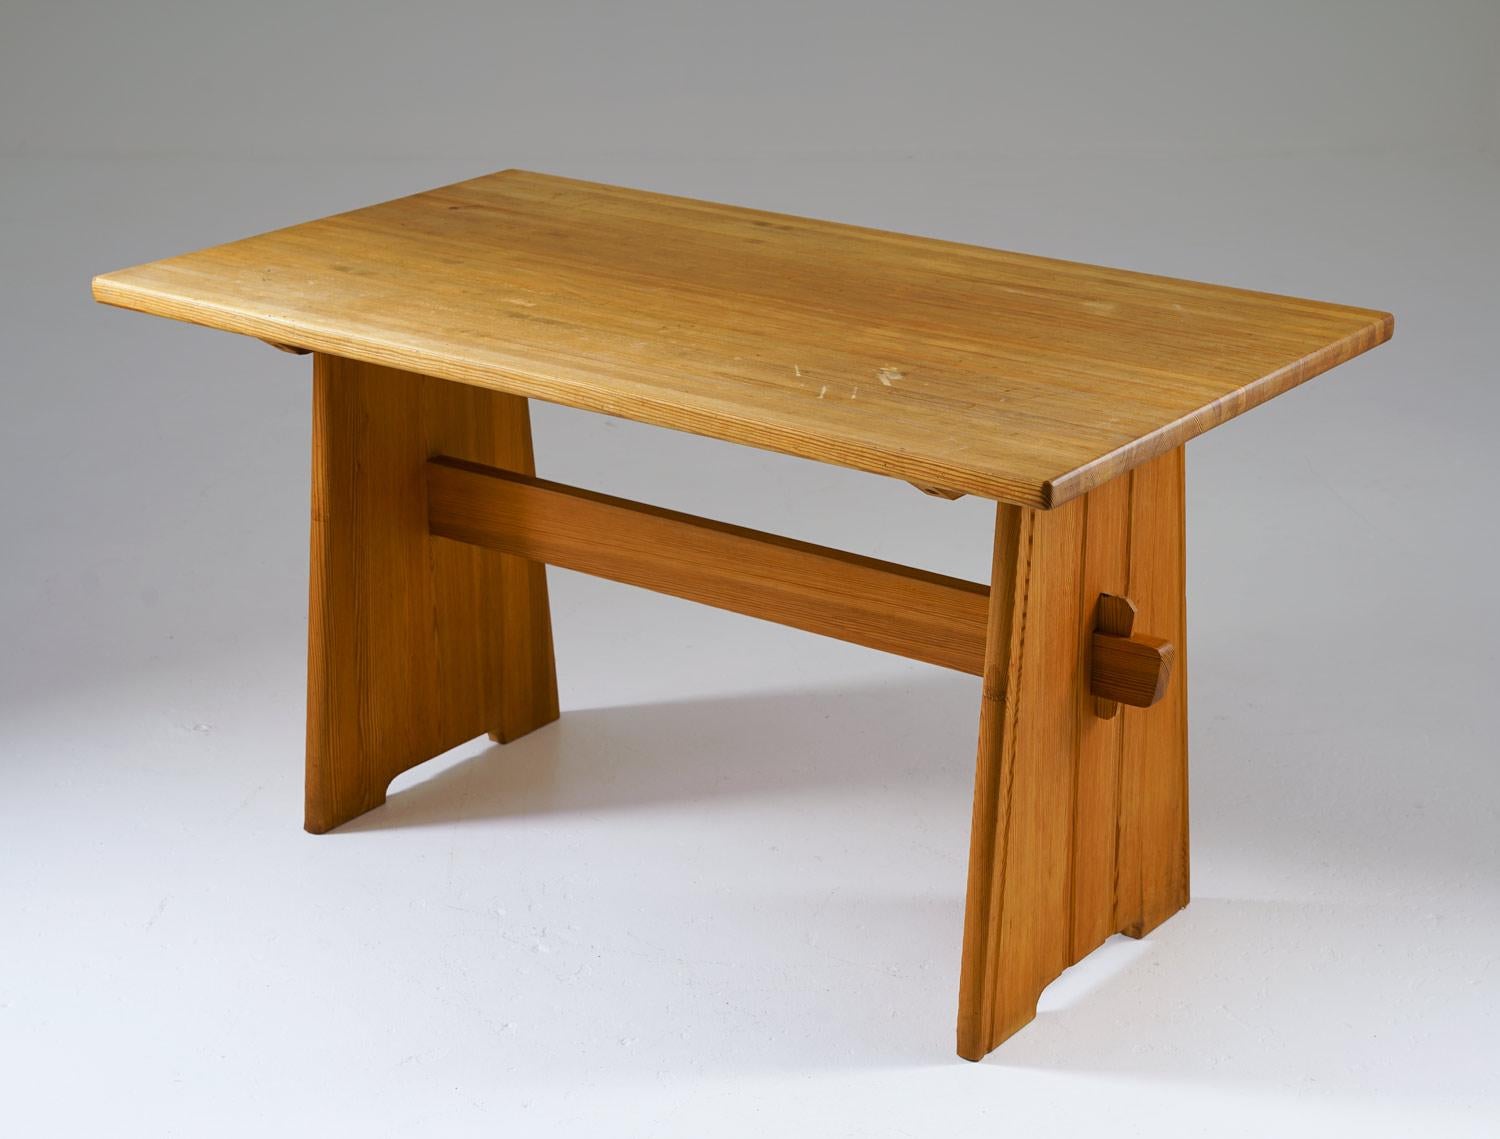 A charming and sturdy dining table, crafted in pine and manufactured in Sweden during the 1950s, possibly designed by Göran Malmvall for the esteemed furniture maker Svensk Fur. This table evokes the highly sought-after 